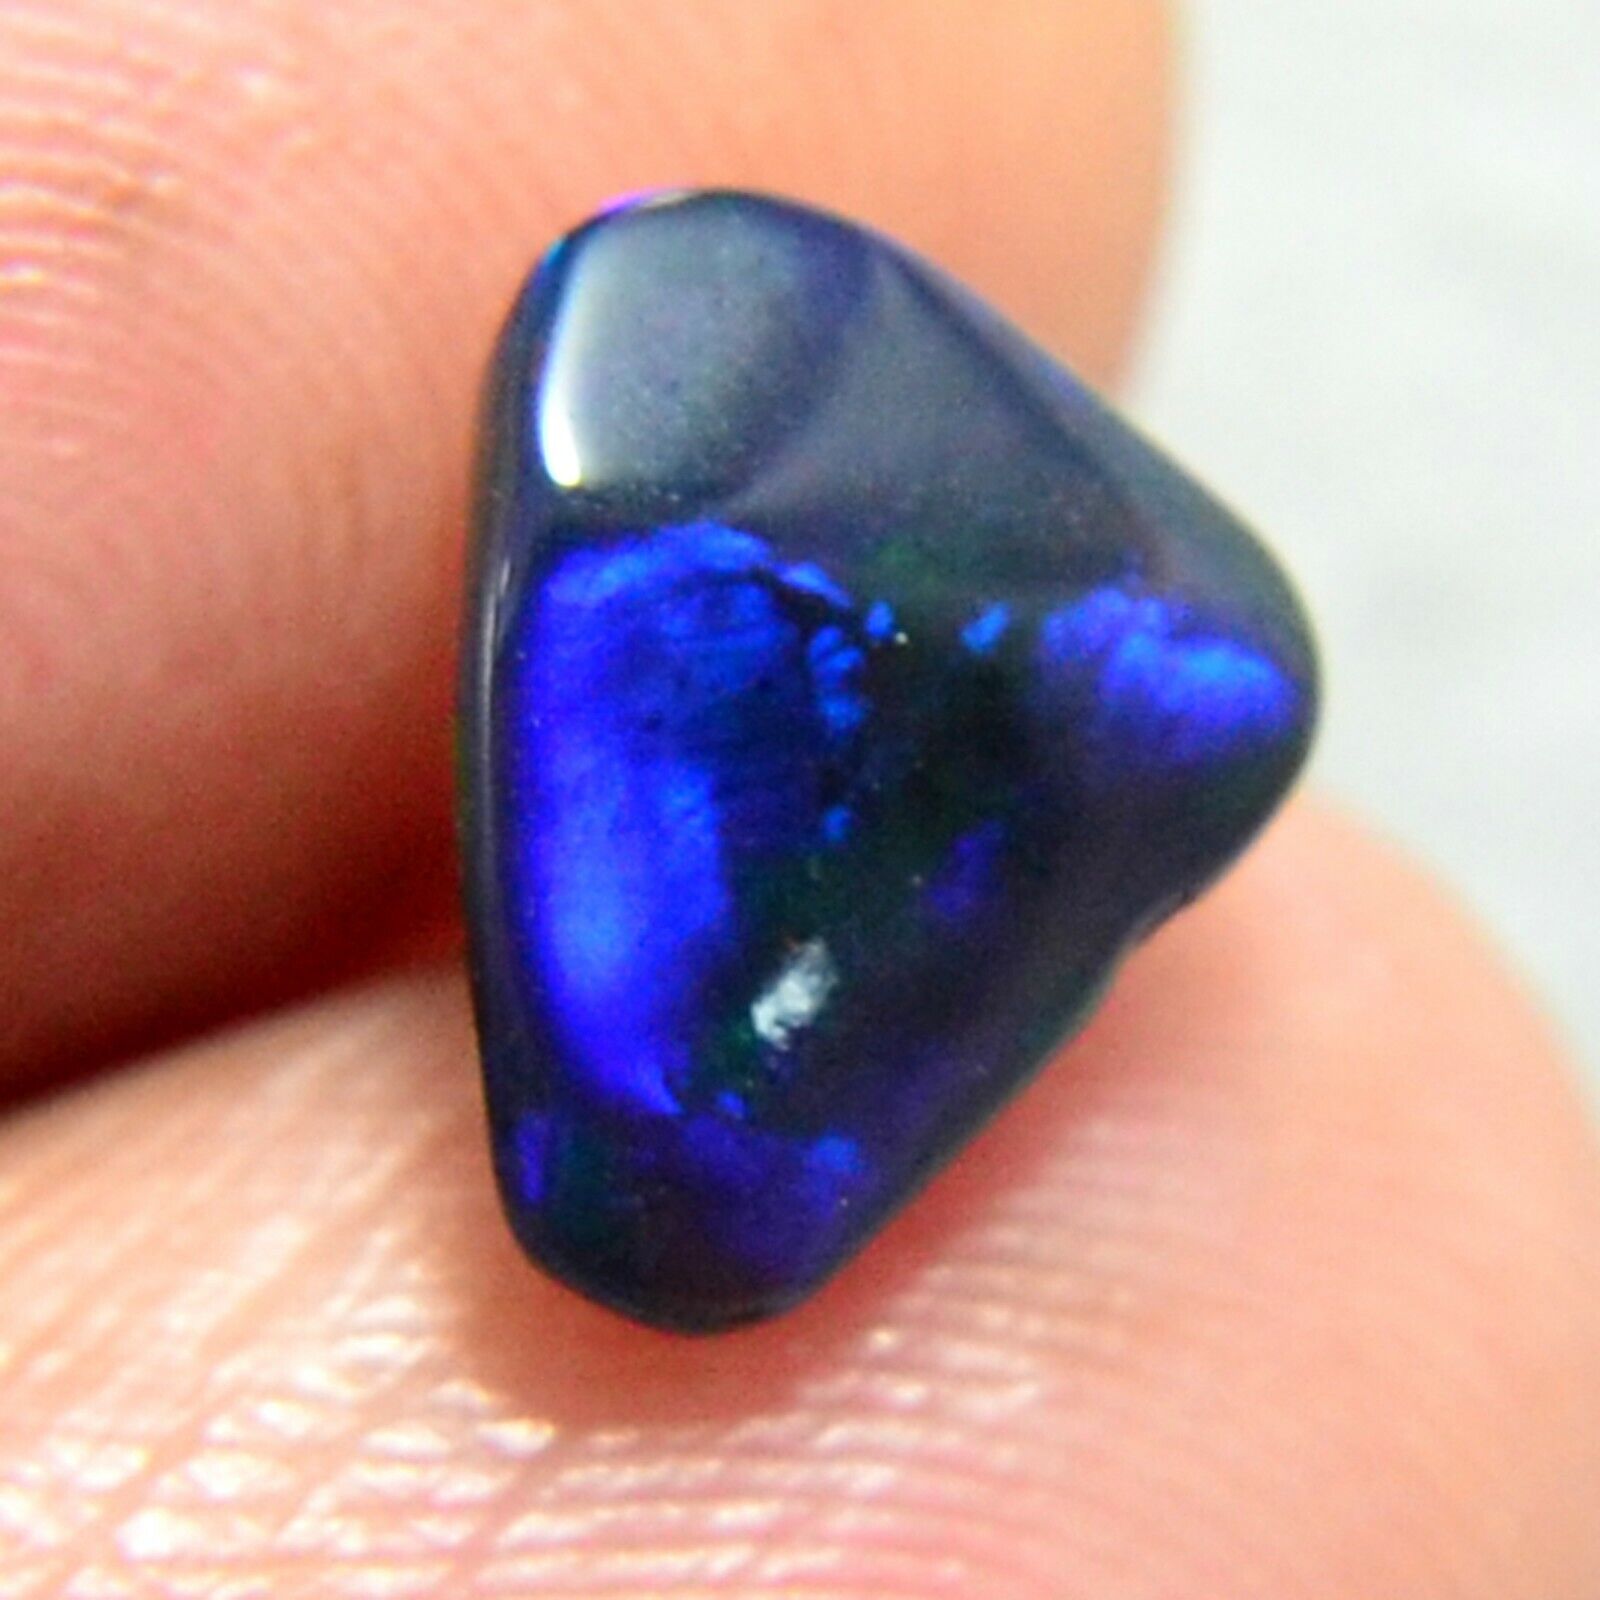 100%Natural- 1.05Carat Black Opal New Found Africa Polished Tumble Rough